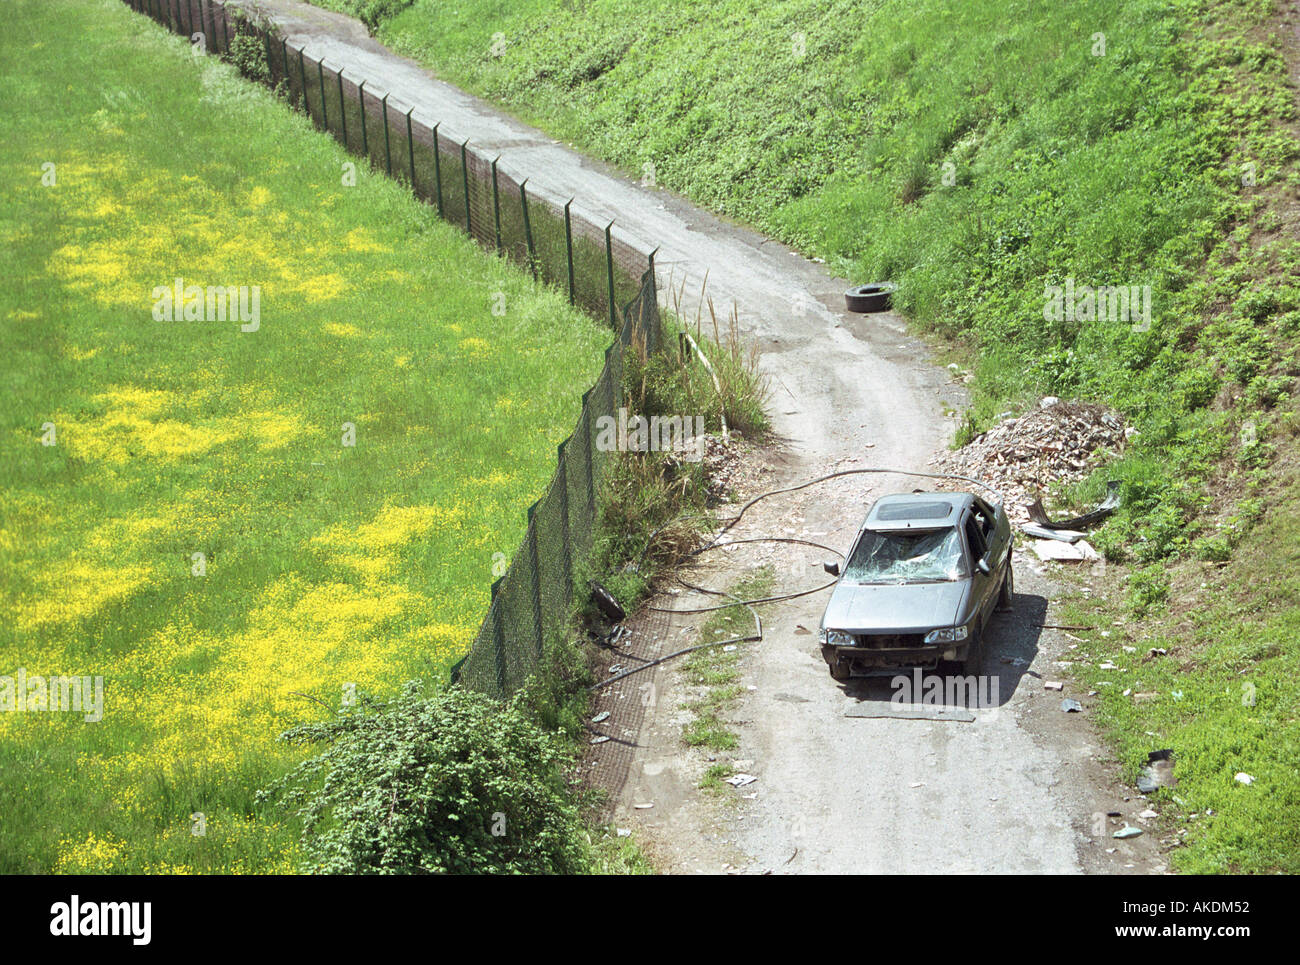 car vandalised and abandoned in secluded lane Stock Photo